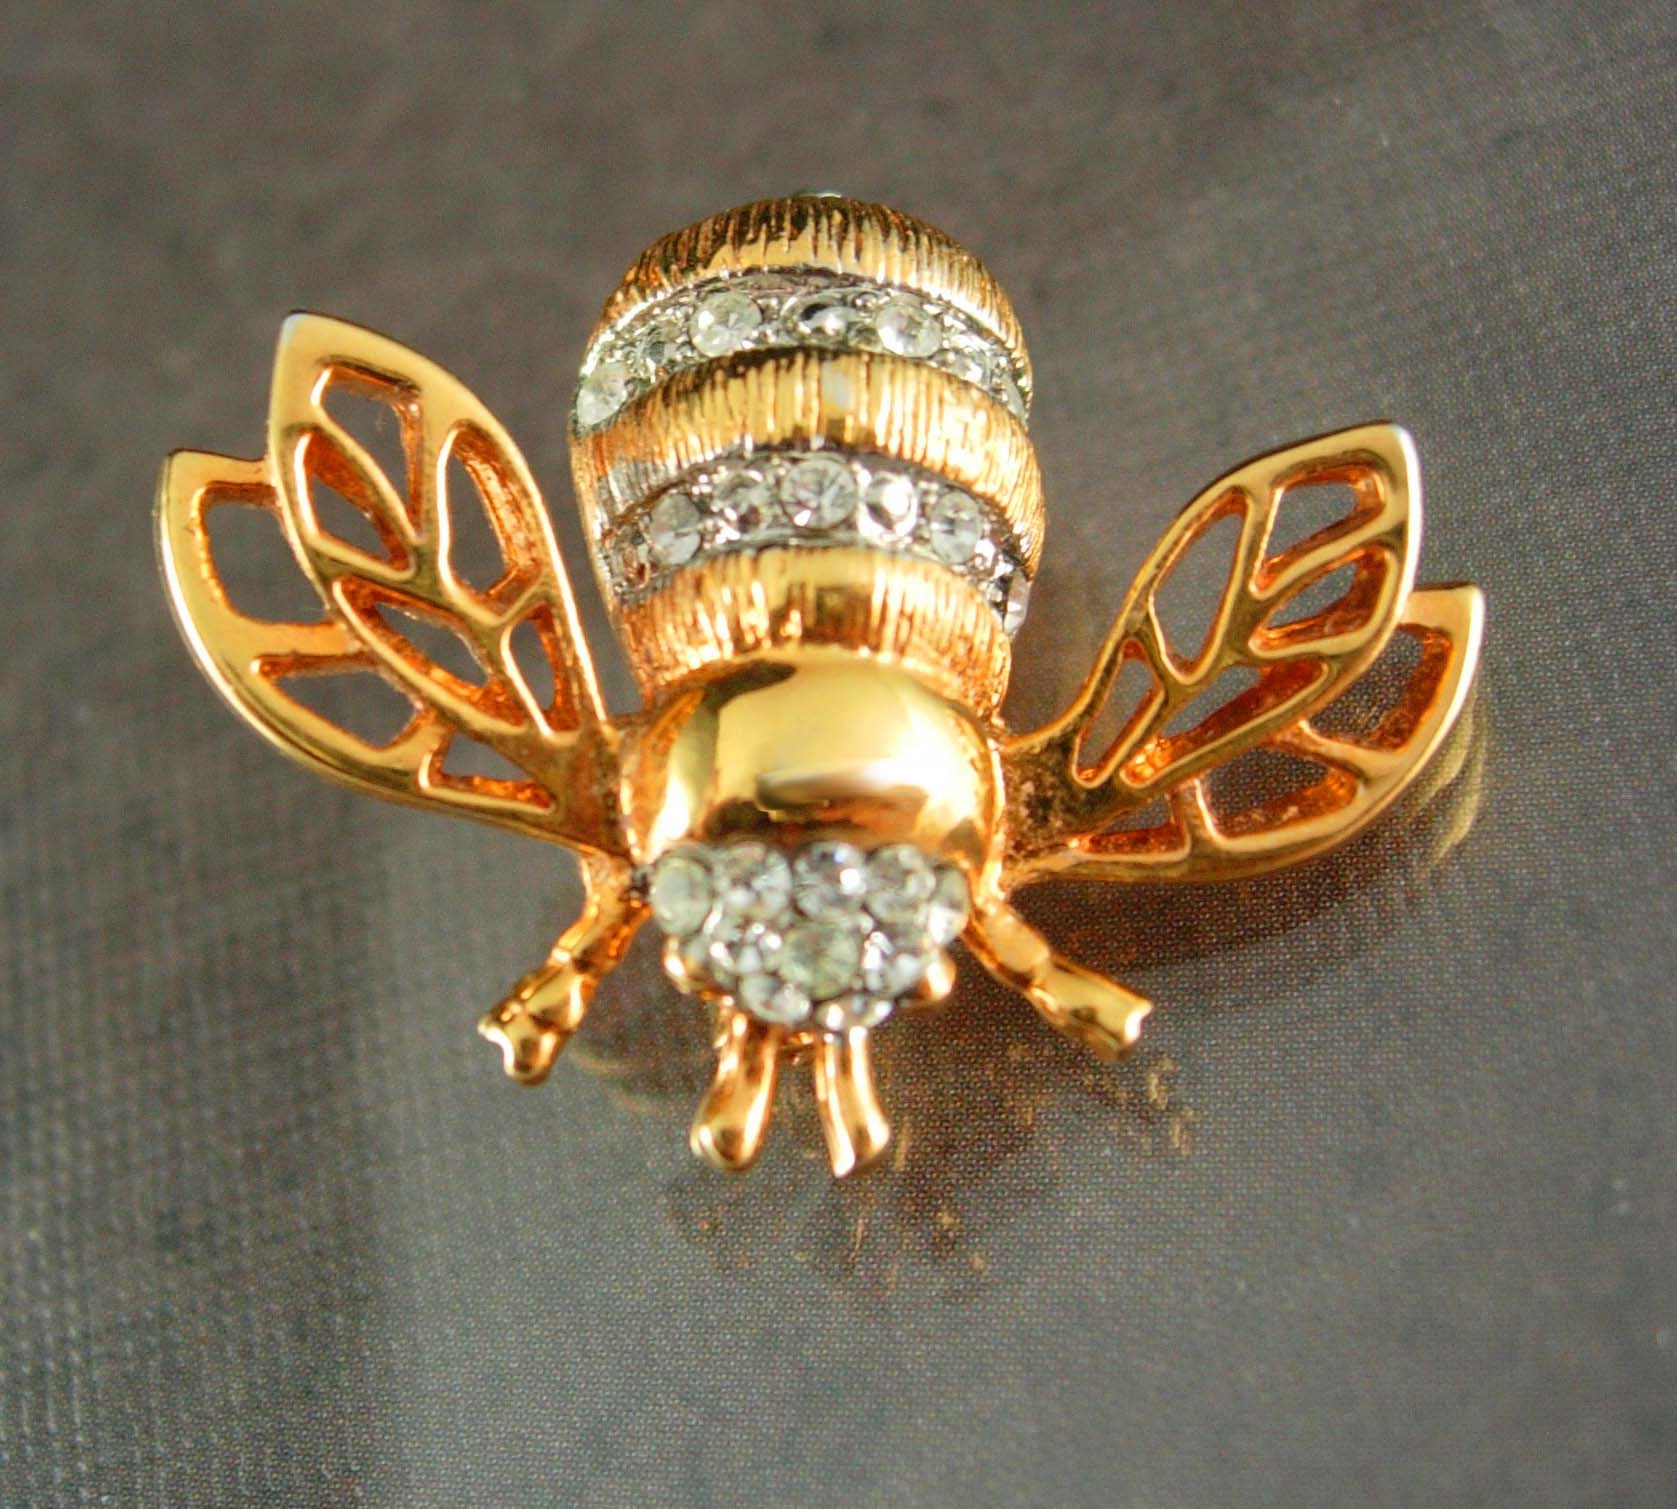 Vintage Napier Brooch  Rhinestone flower and bee pin  faux pearl figural fly insect  gardener gift  30th anniversary  June birthday